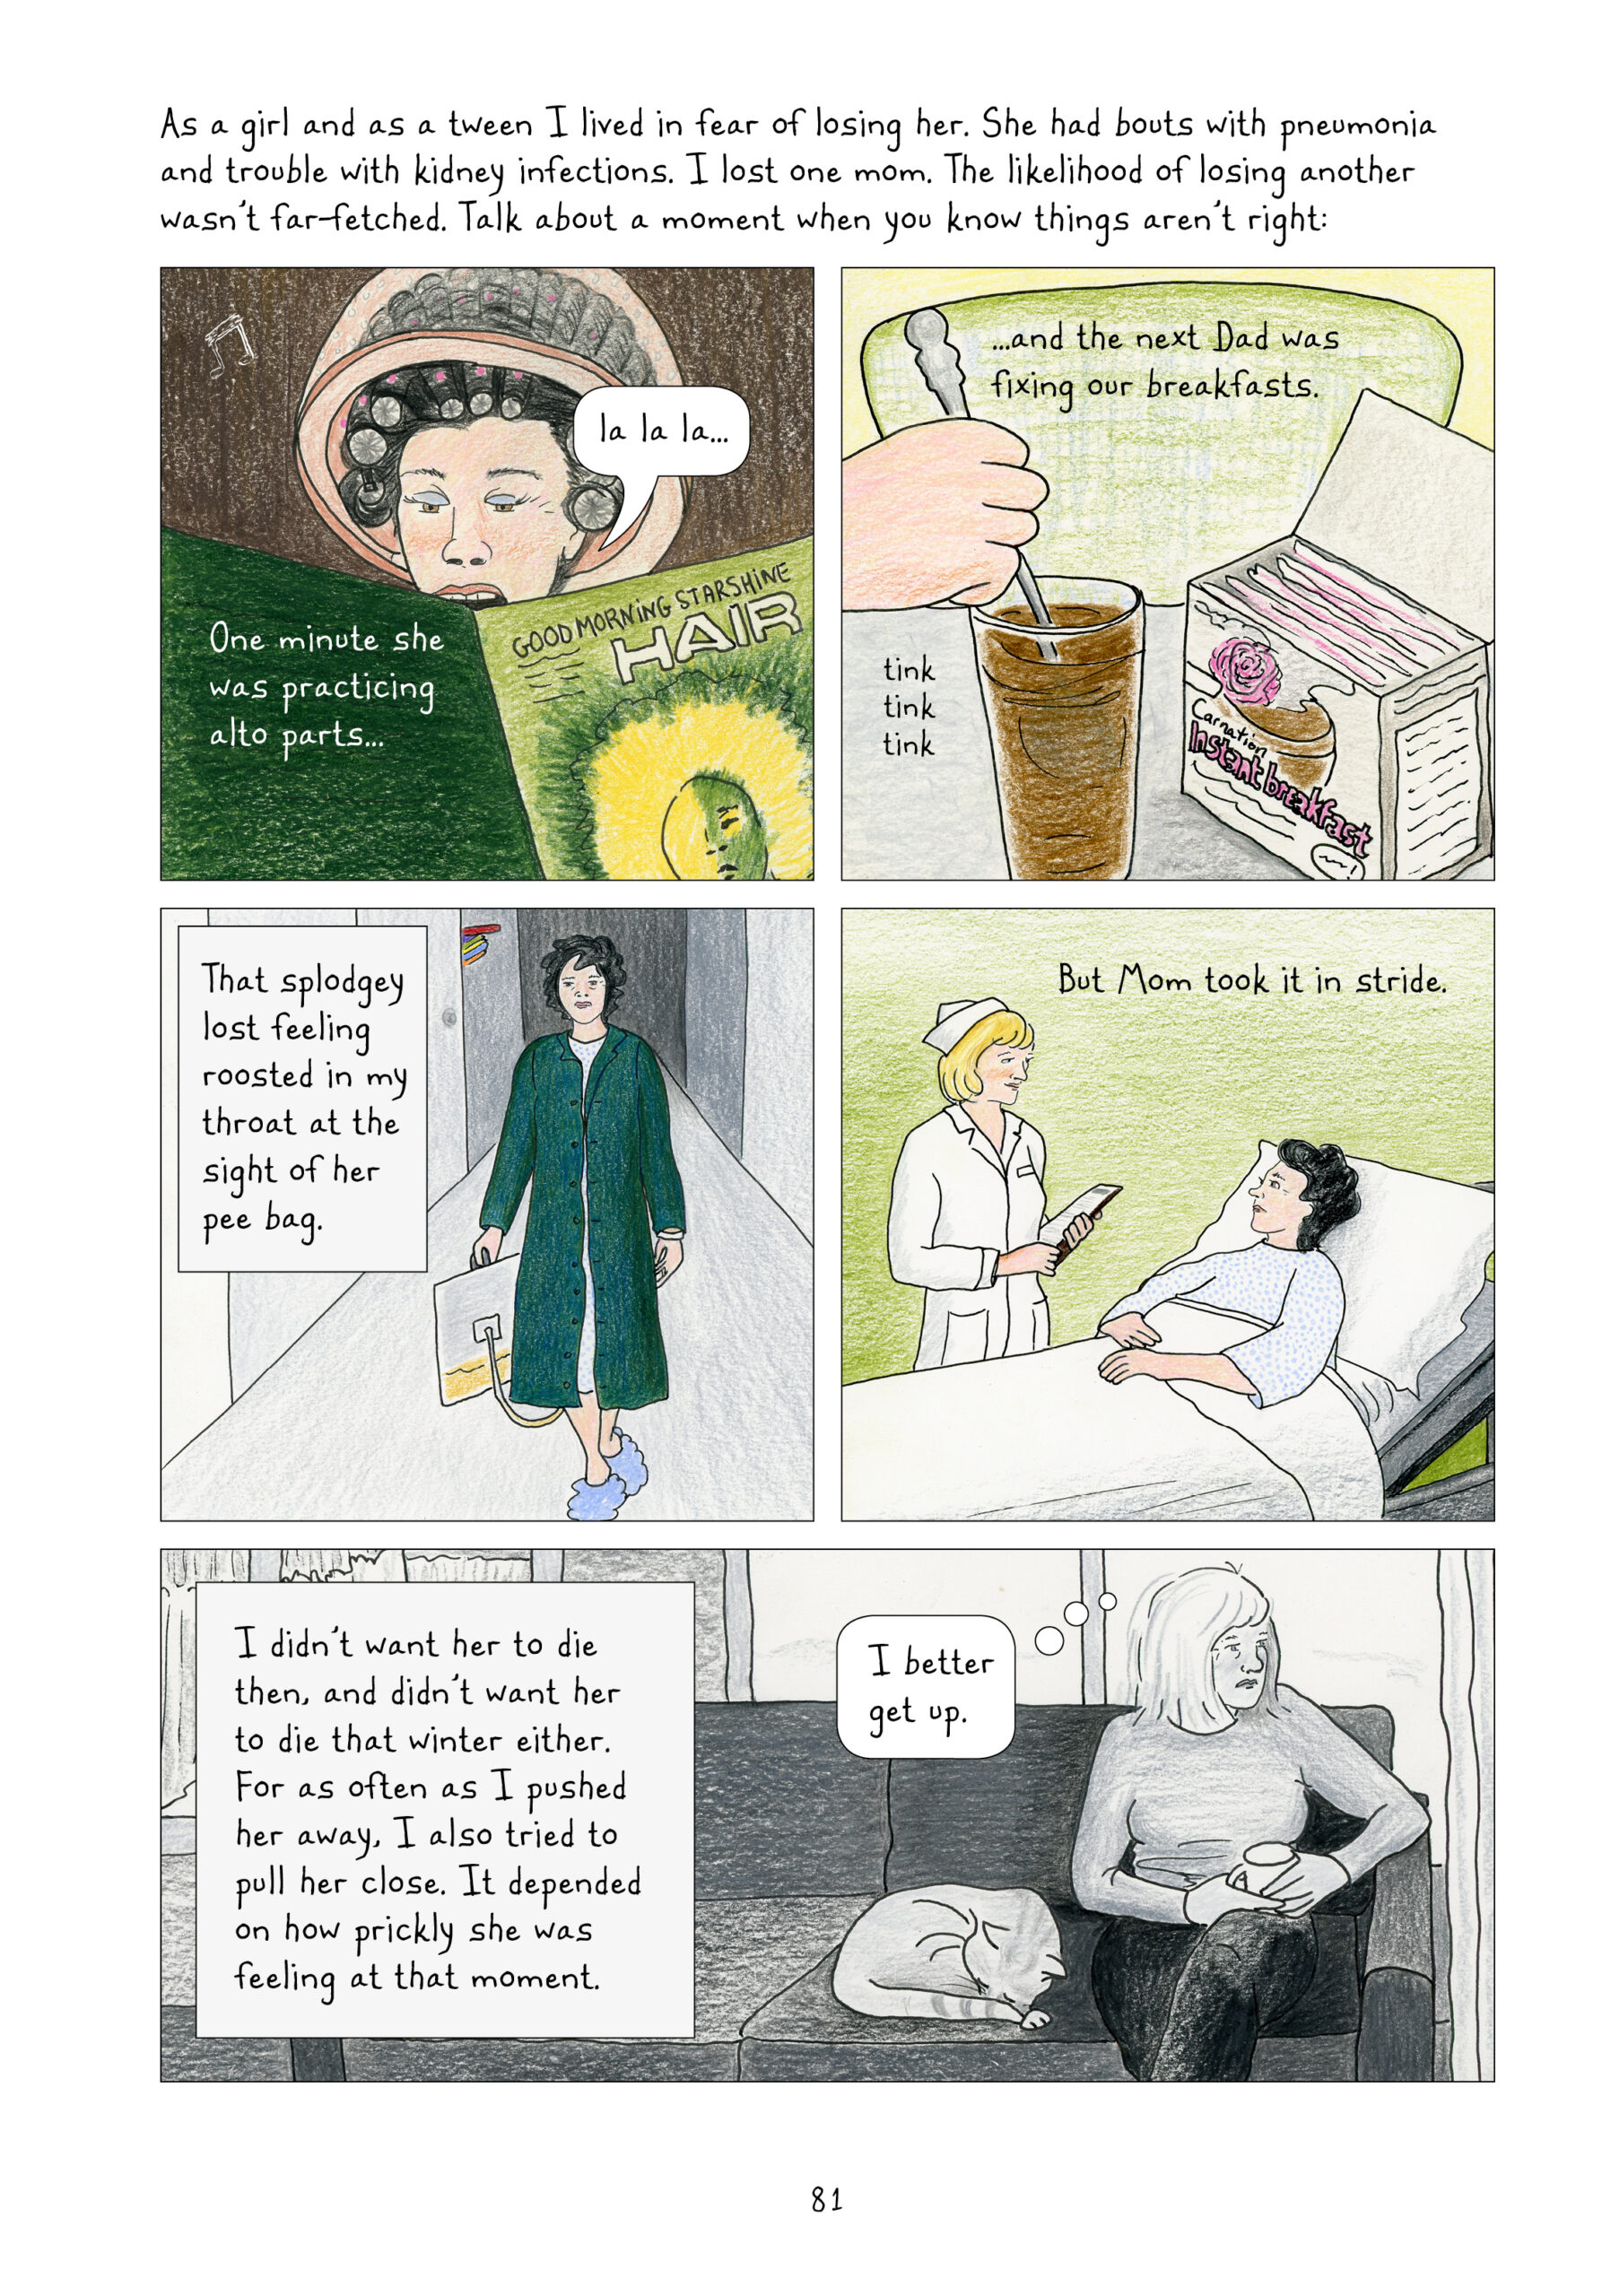 Lynn continues narrating, "As a girl and as a tween I lived in fear of losing her. She had bouts of pneumonia and trouble with kidney infections. I lost one mom. The likelihood of losing another wasn't far-fetched. Talk about a moment when you know things aren't right:"

A four panel grid in color takes up most of the page. 
1. Younger Lorraine is at the hair salon; she has her hair in curlers and her head in the 50s-style hair dryer. She is reading a magazine called Good Morning Starshine Hair, and she is singing, "La la la..." Lynn narrates, "One minute she was practing alto parts..."
2. "...and the next Dad was fixing our breakfasts." A hand is stirring a glass of brown liquid next to a box that reads, "Carnation Instant Breakfast."

3. Lorraine is walking through a hospital hall wearing a green trench coat over a hospital gown. She is holding a pee bag at her side. "That splodgey lost feeling roosted in my throat at the sight of her pee bag."
4. Lorraine is lying in her hospital bed, angled up slightly so she is sitting up a bit. She is looking at her nurse with blonde hair in a classic 50s white nurse uniform, who holds a chart in her arms. "But Mom took it in stride."

The last panel on the page is in black and white. Lynn narrates, "I didn't want her to die then, and didn't want her to die that winter either. For as often as I pushed her away, I also tried to keep her close. It depended on how prickly she was feeling at that moment." Adult Lynn is sitting on her couch, looking off to the side solemnly. Her cat is curled up sleeping next to her. She thinks to herself, "I better get up."